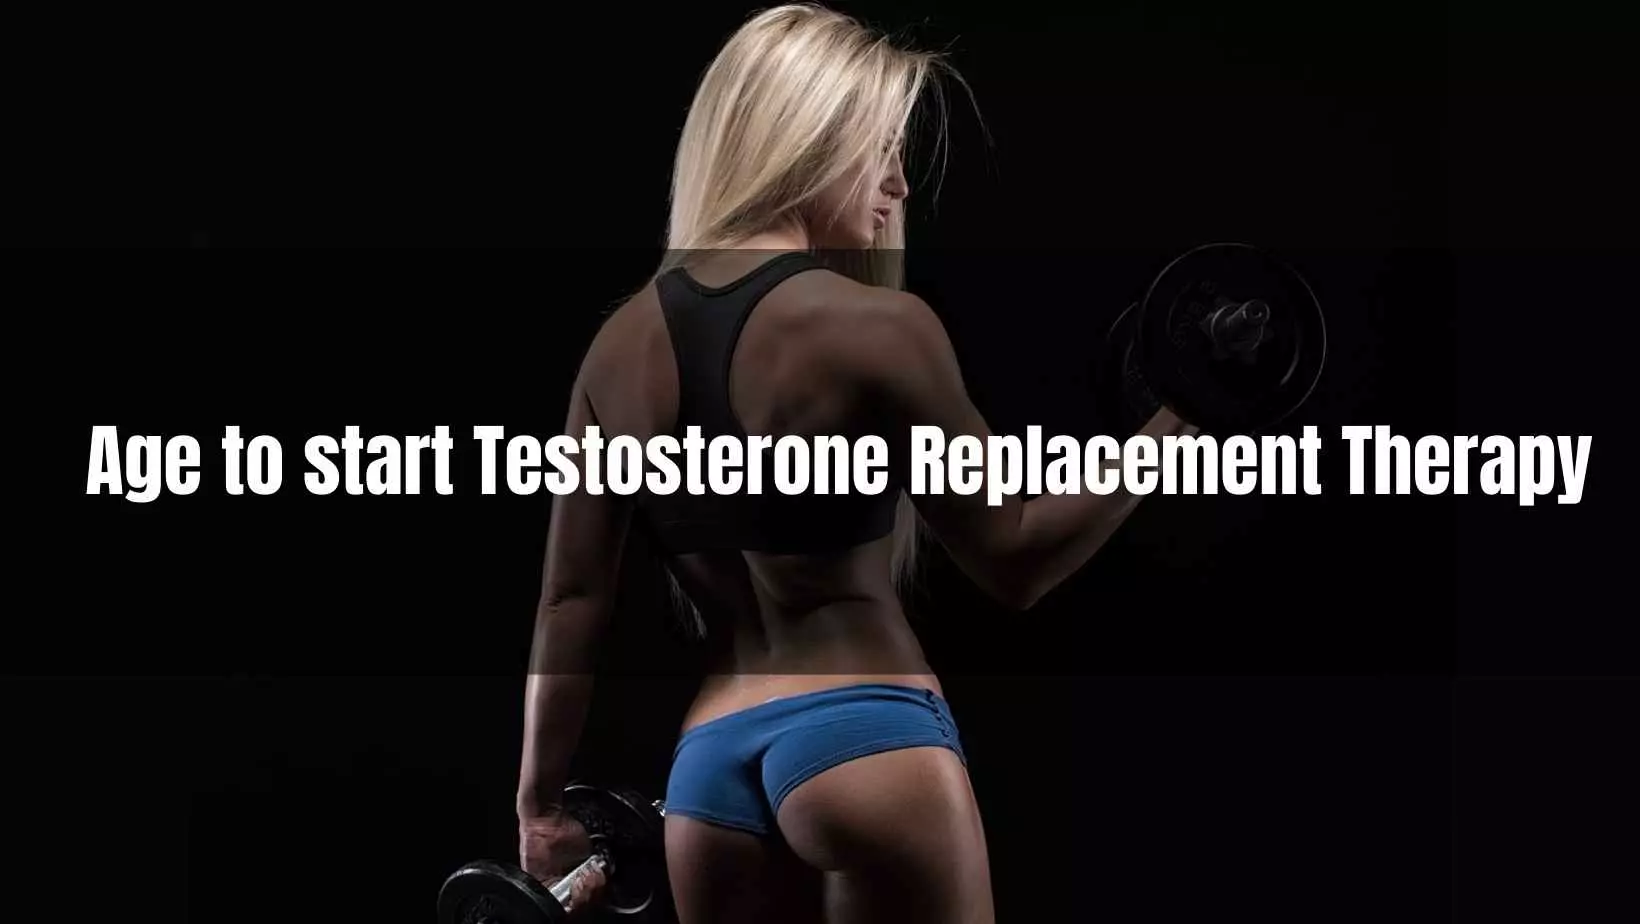 rt_Testosterone_Replacement_Therapy_